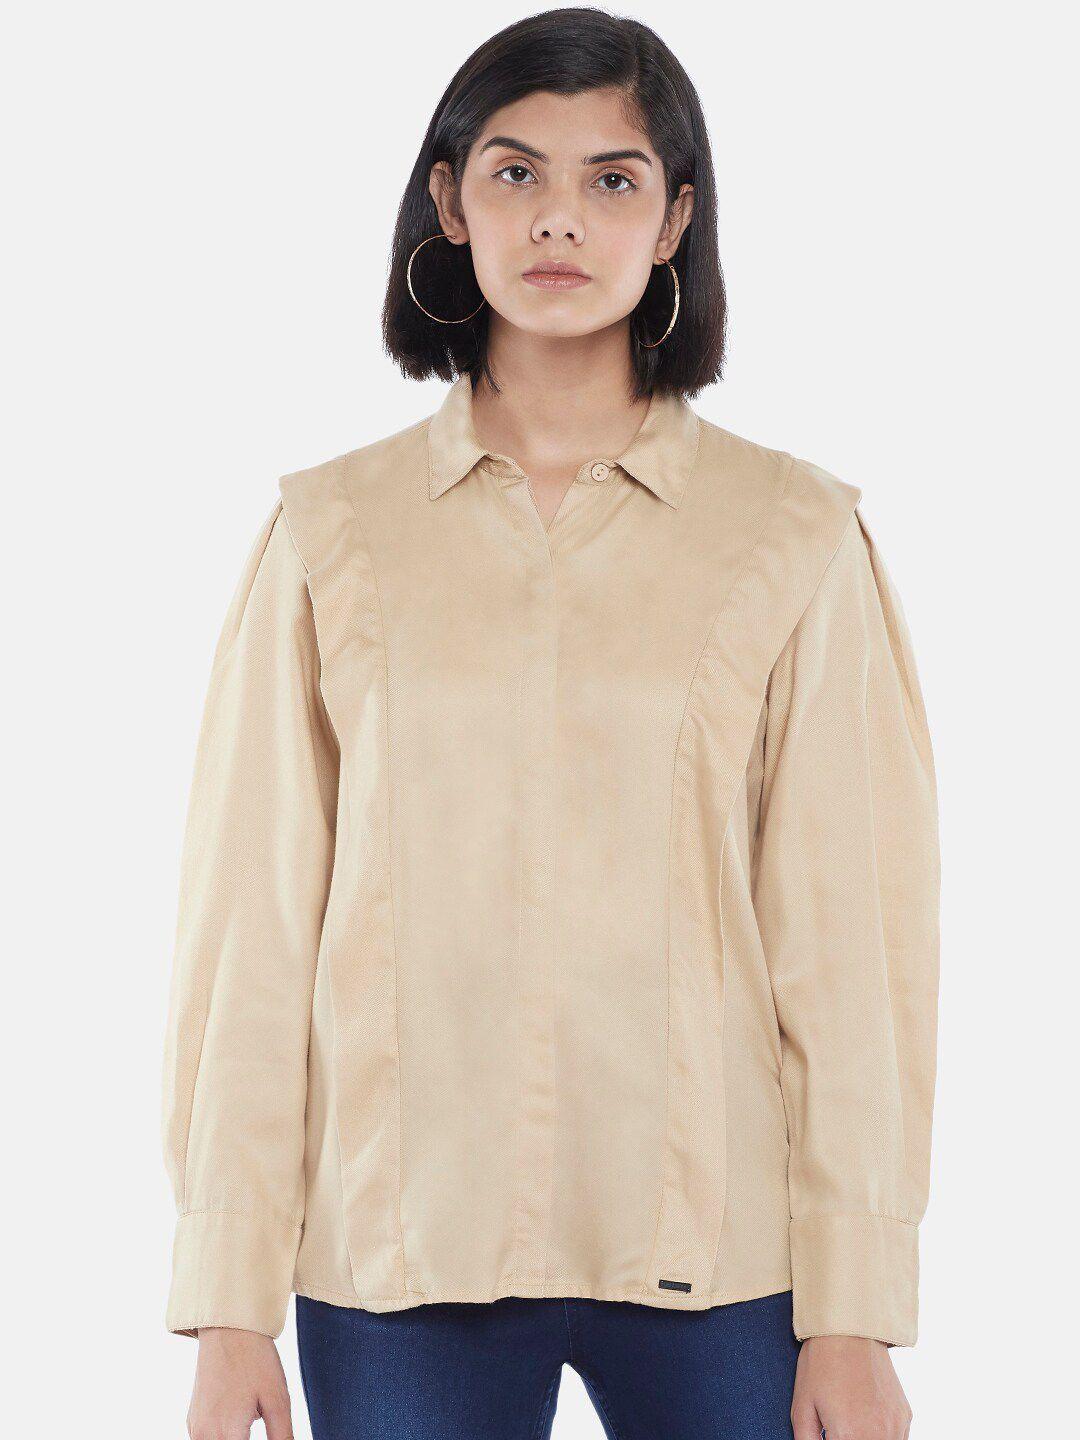 sf-jeans-by-pantaloons-women-beige-casual-shirt